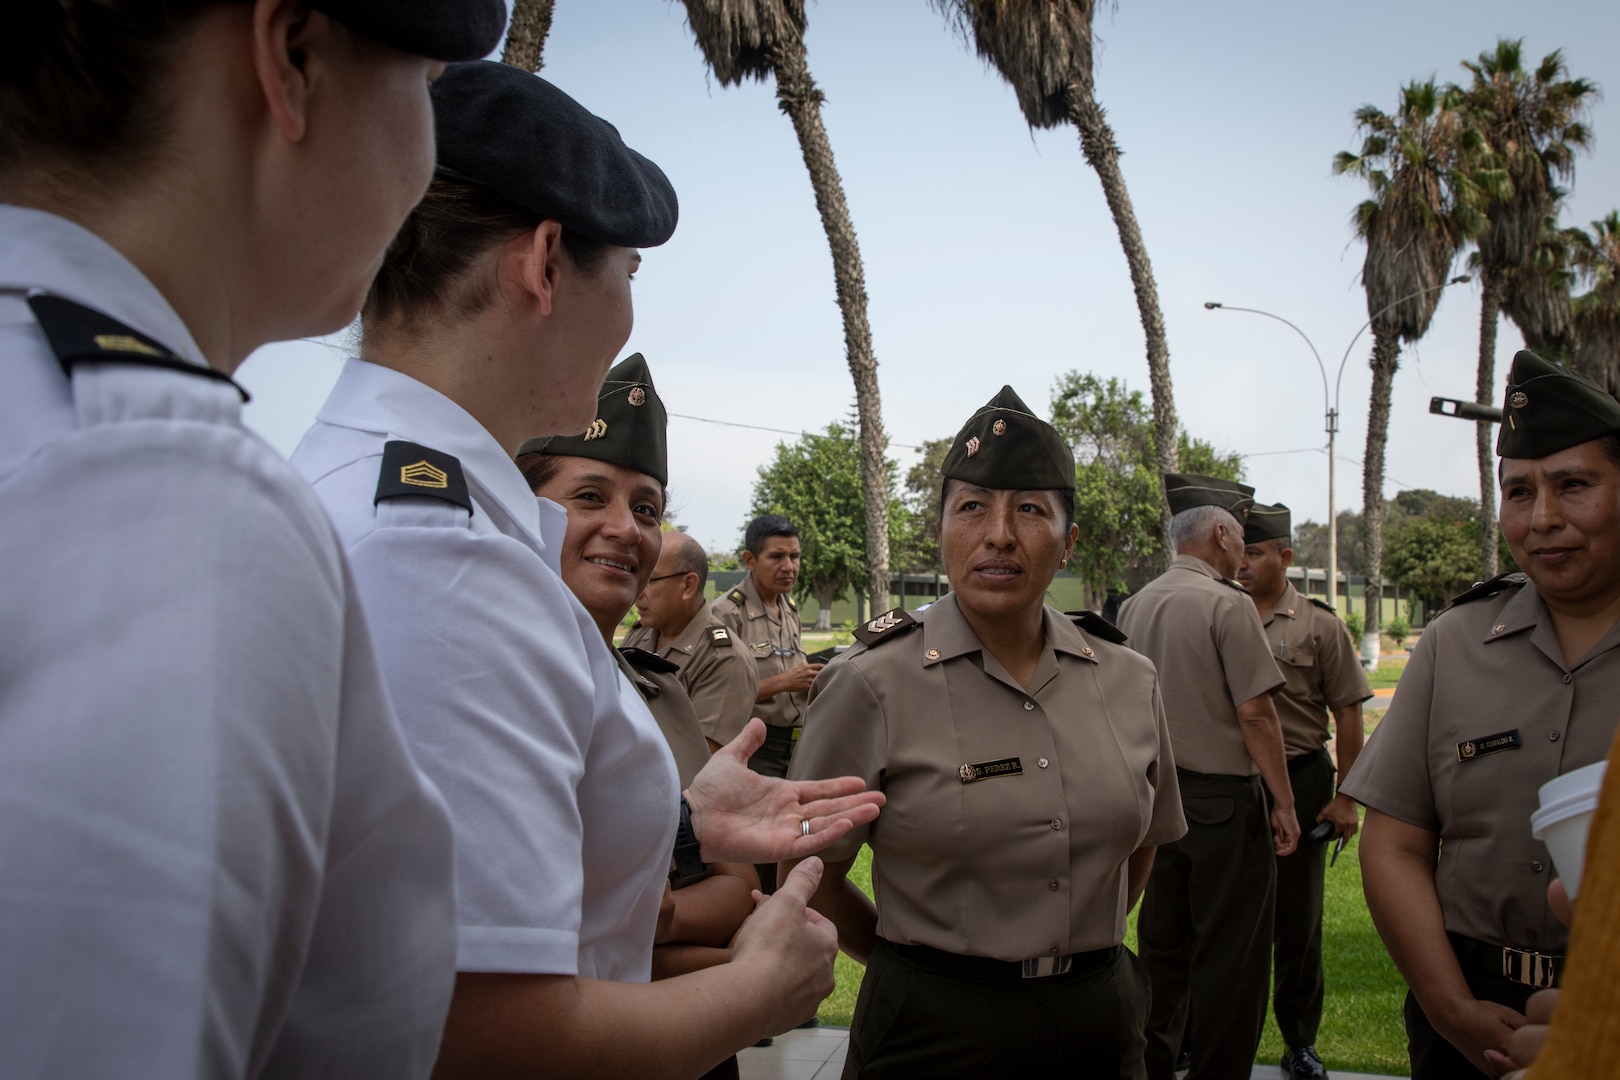 Senior enlisted leaders and Soldiers of the West Virginia Army National Guard participated in a weeklong State Partnership Program engagement in Lima, Peru, Feb. 3-7, 2020, working alongside Peruvian Armed Forces to enhance the non-commissioned officer corps through professional development.